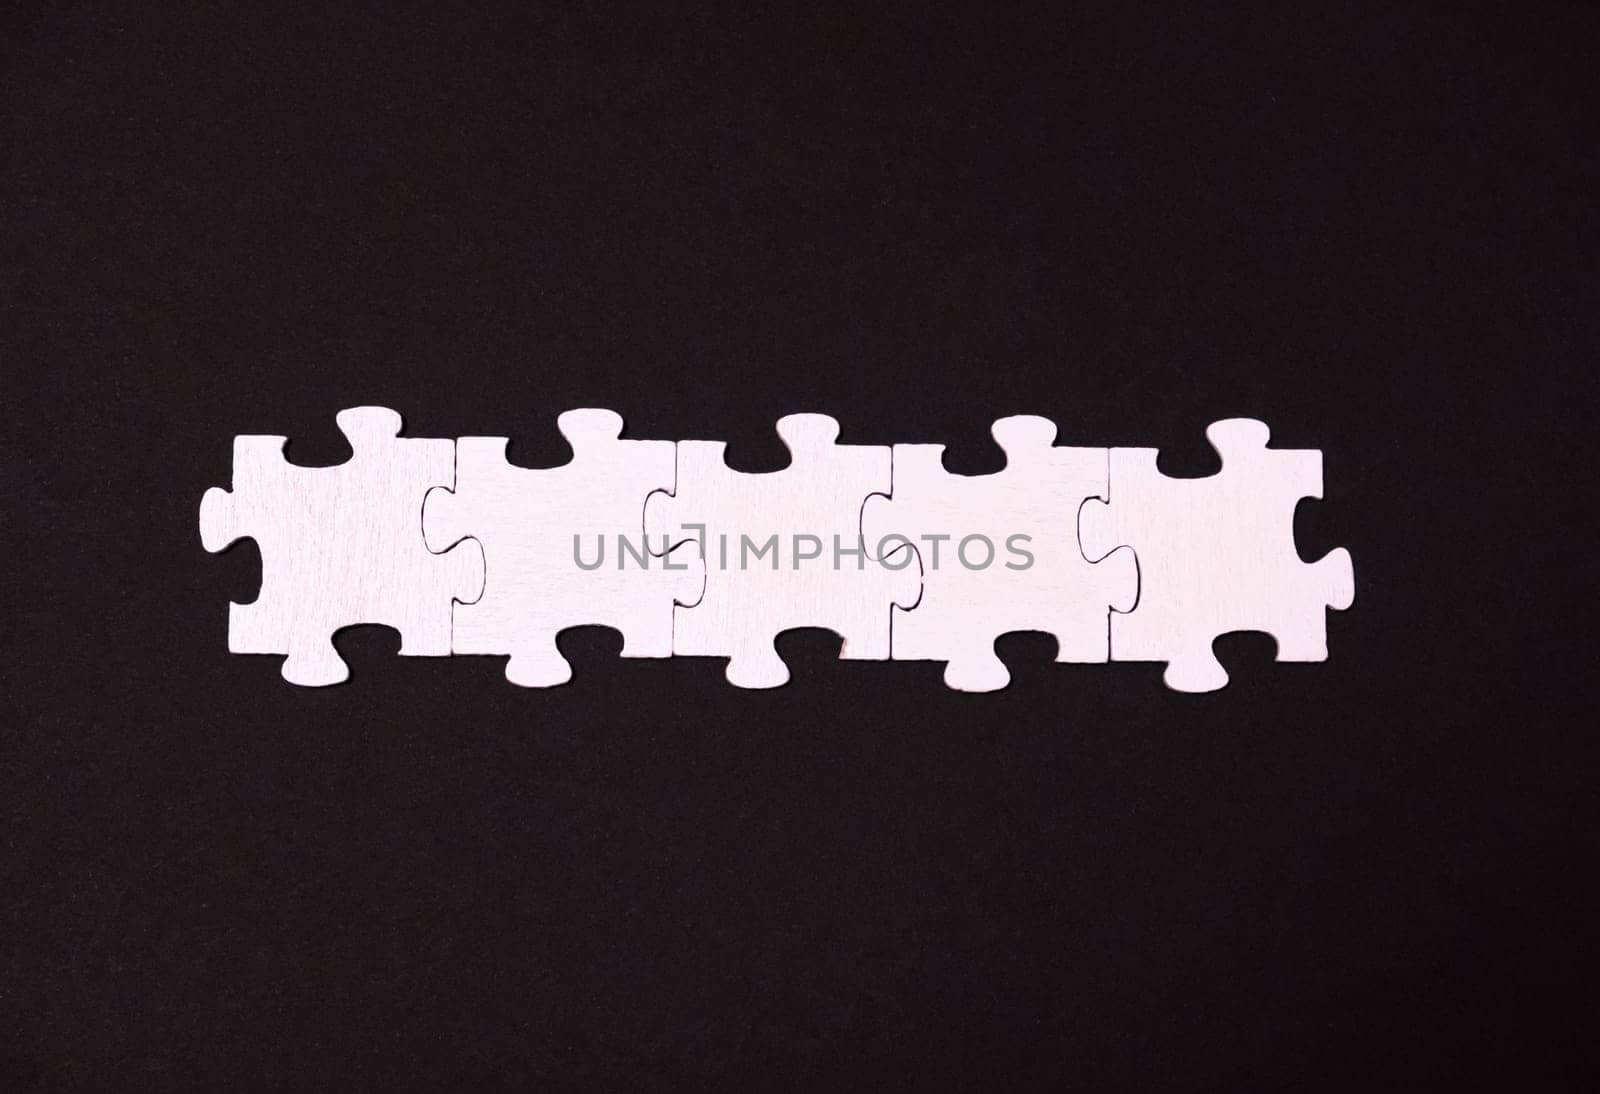 A row of white puzzle pieces on a black background by Alla_Morozova93